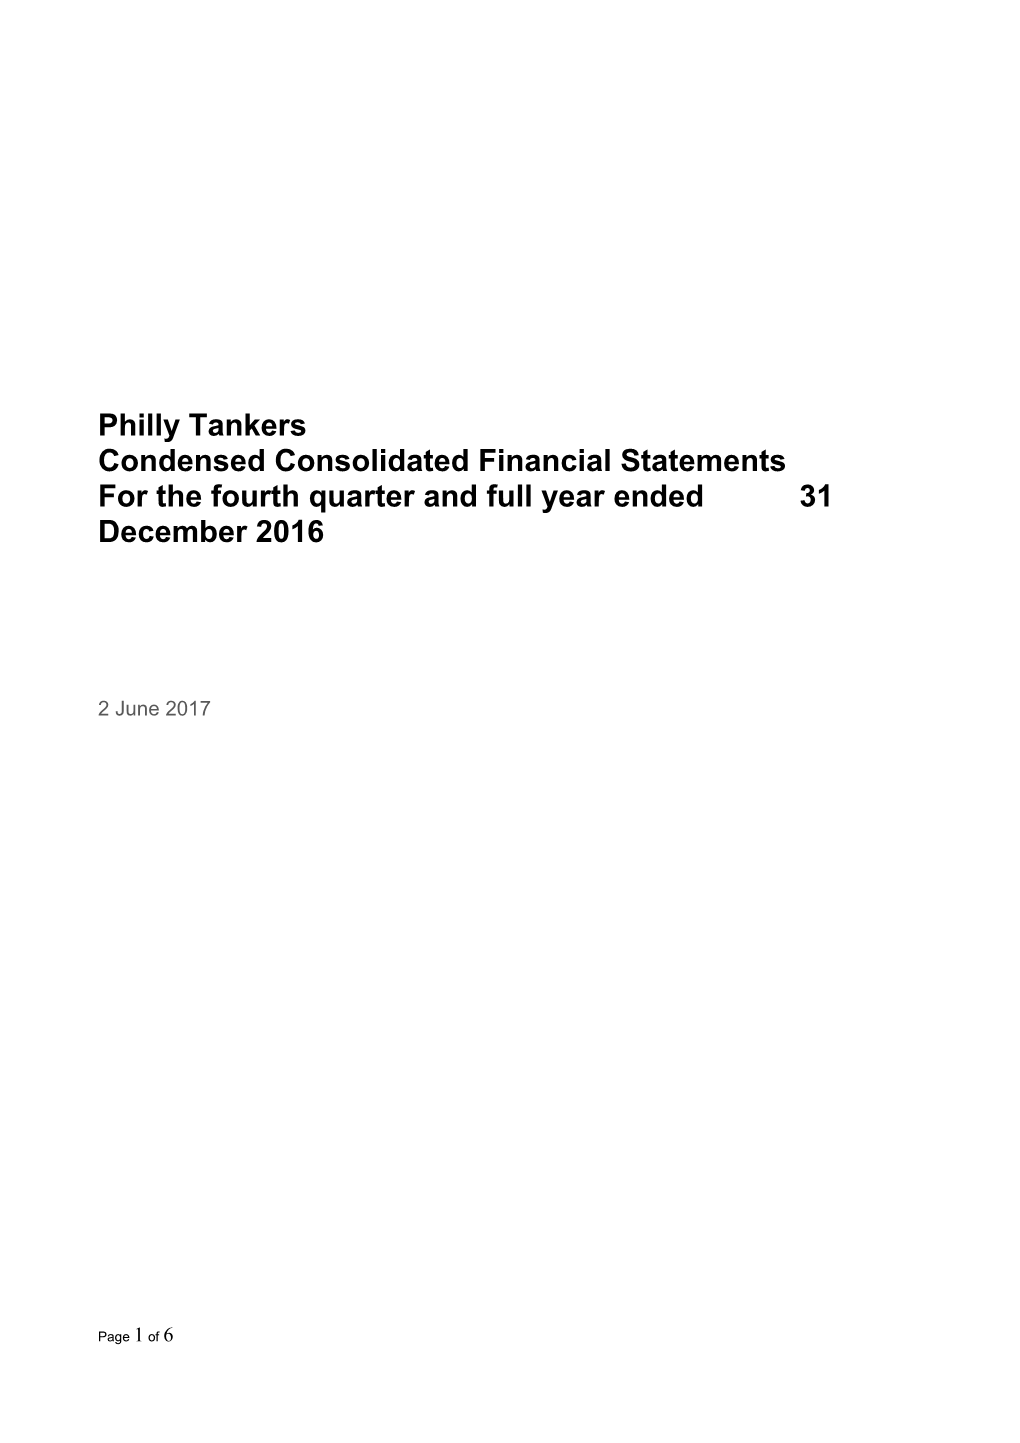 Condensed Consolidated Financial Statements